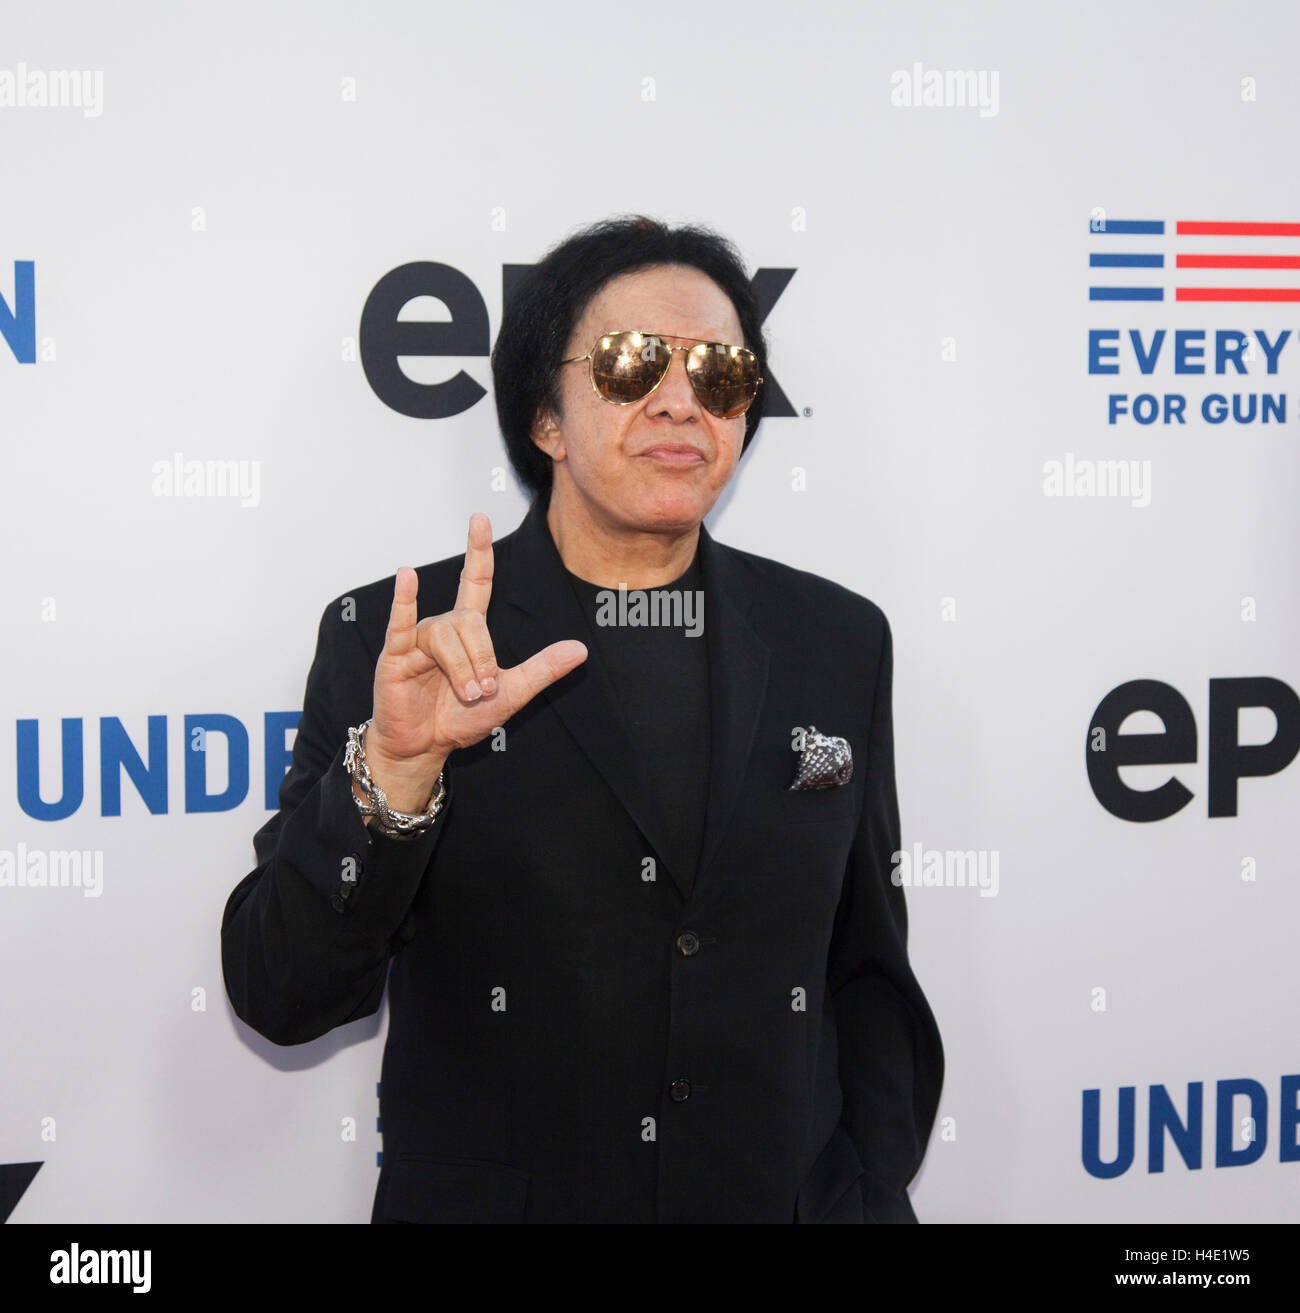 Gene Simmons arrives at the Academy of Motion Picture Arts and Sciences for the premiere of 'Under the Gun' on Epix Stock Photo